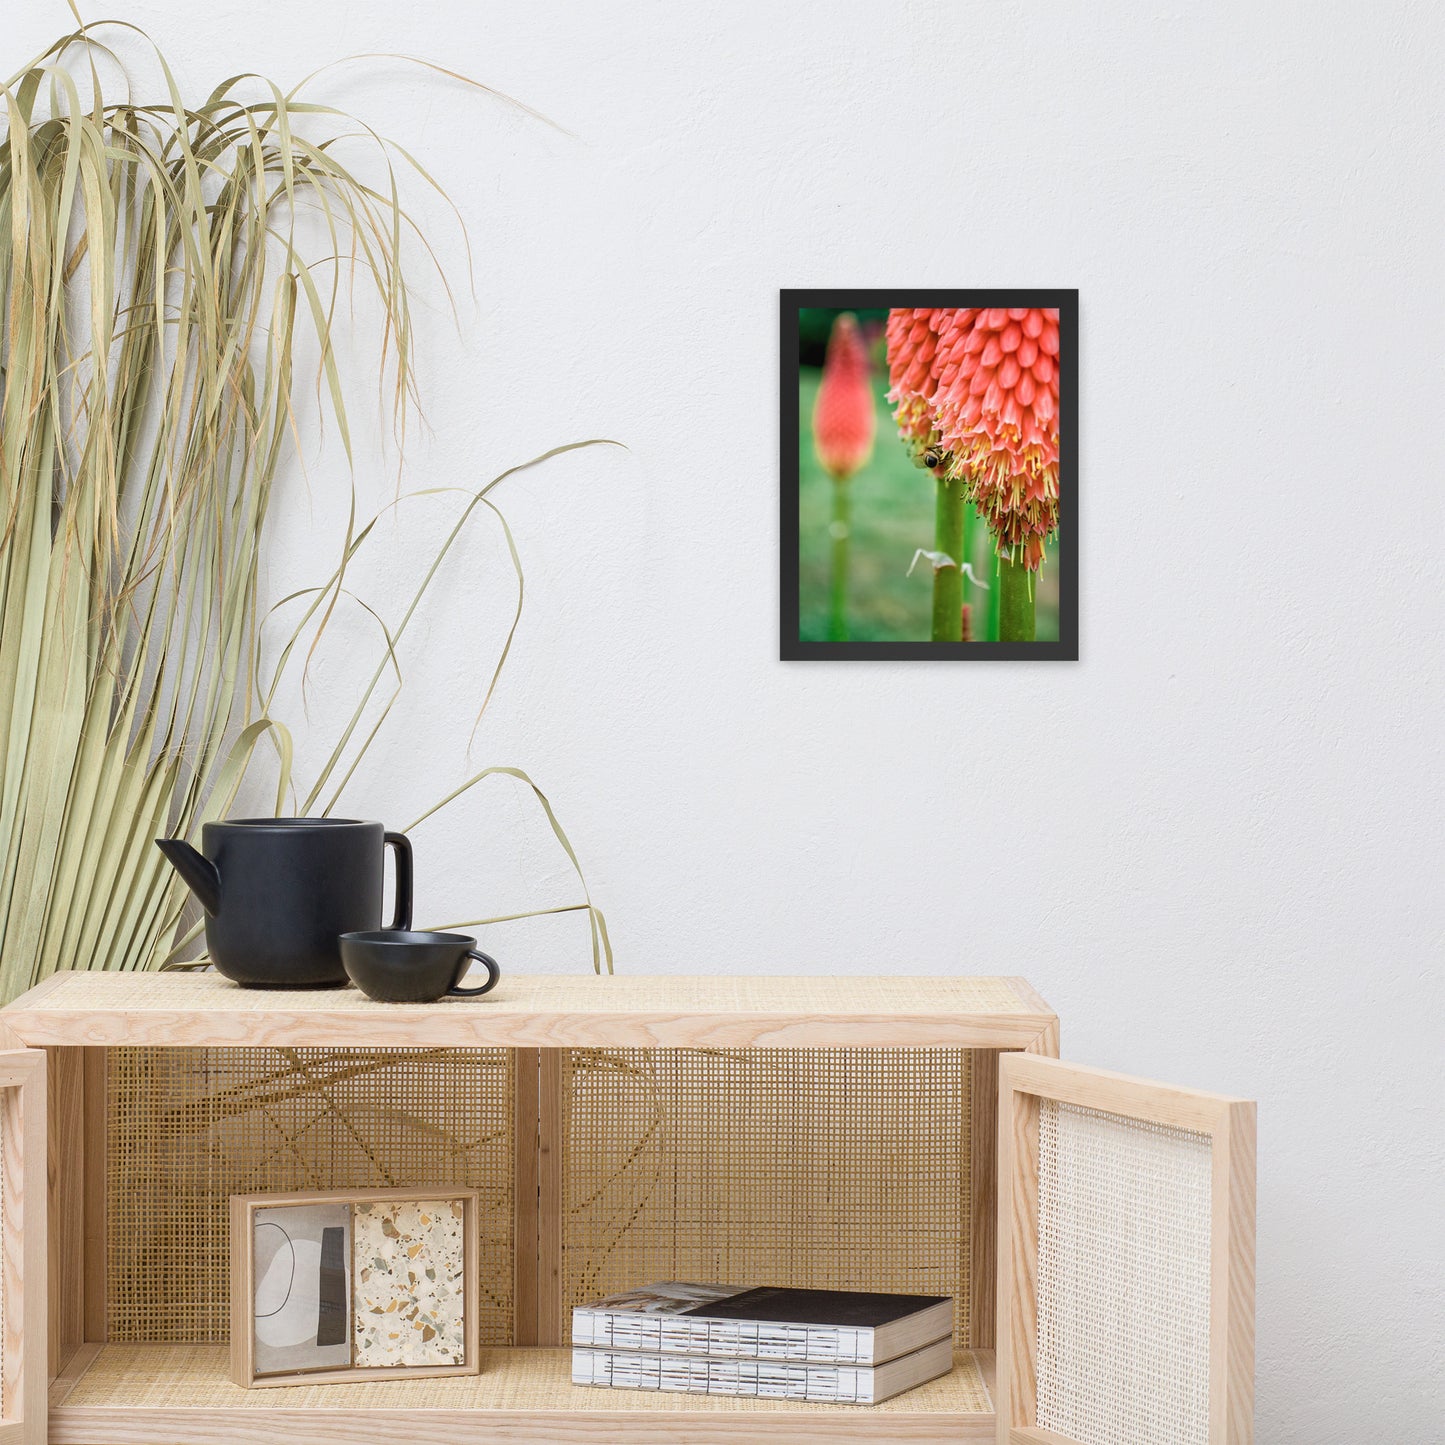 Red Hot Pokers Floral Nature Photo Framed Wall Art Print